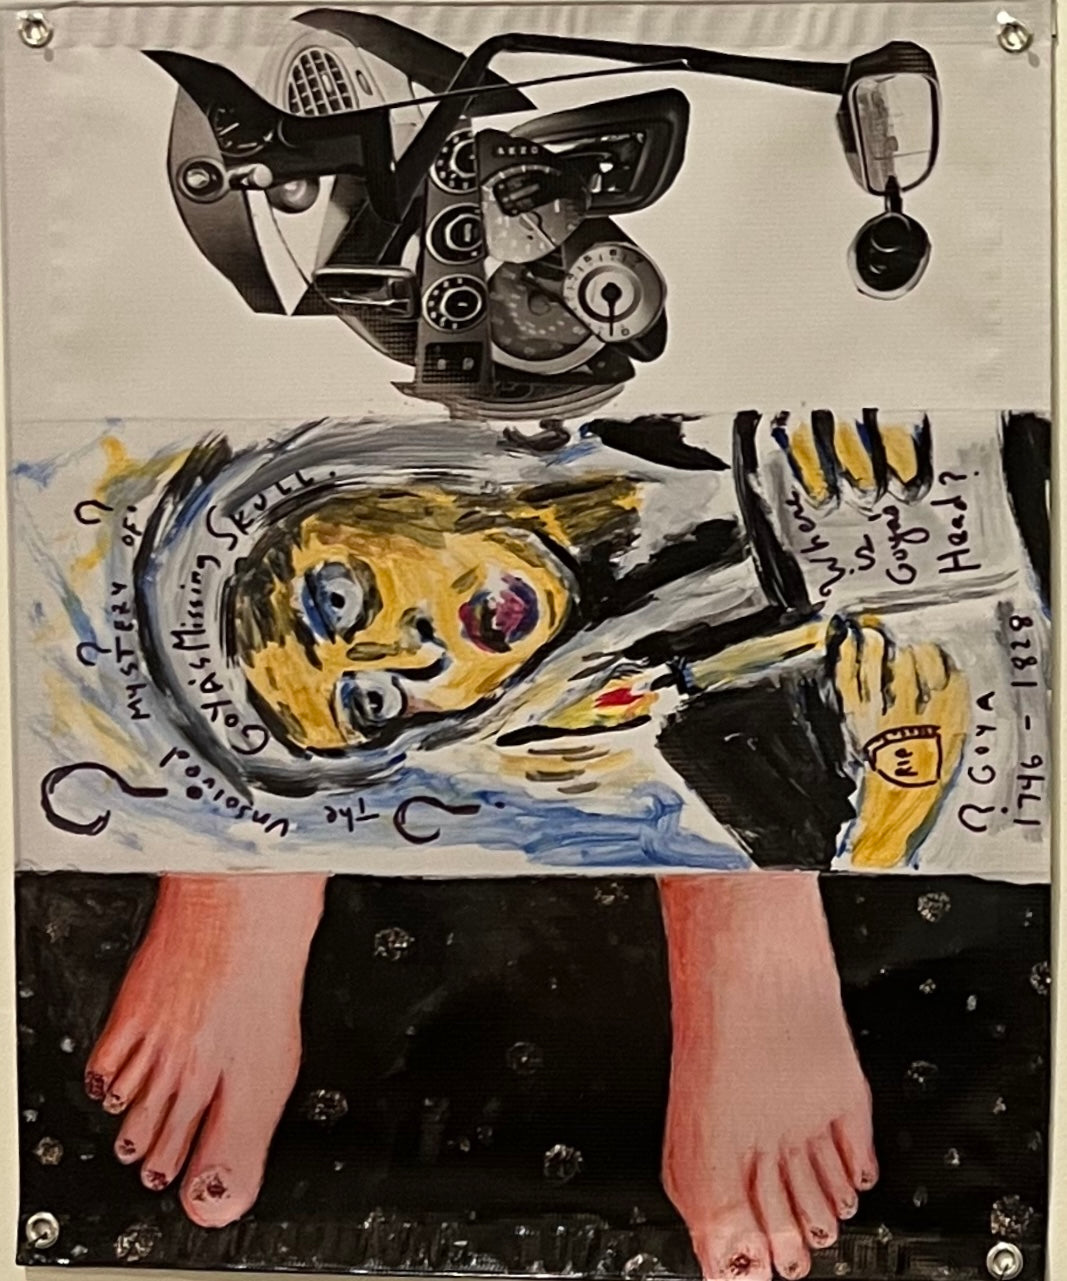 Lisa Bowman, "Exquisite Corpse Banner #2 (Justine, Scooter, Sally)"